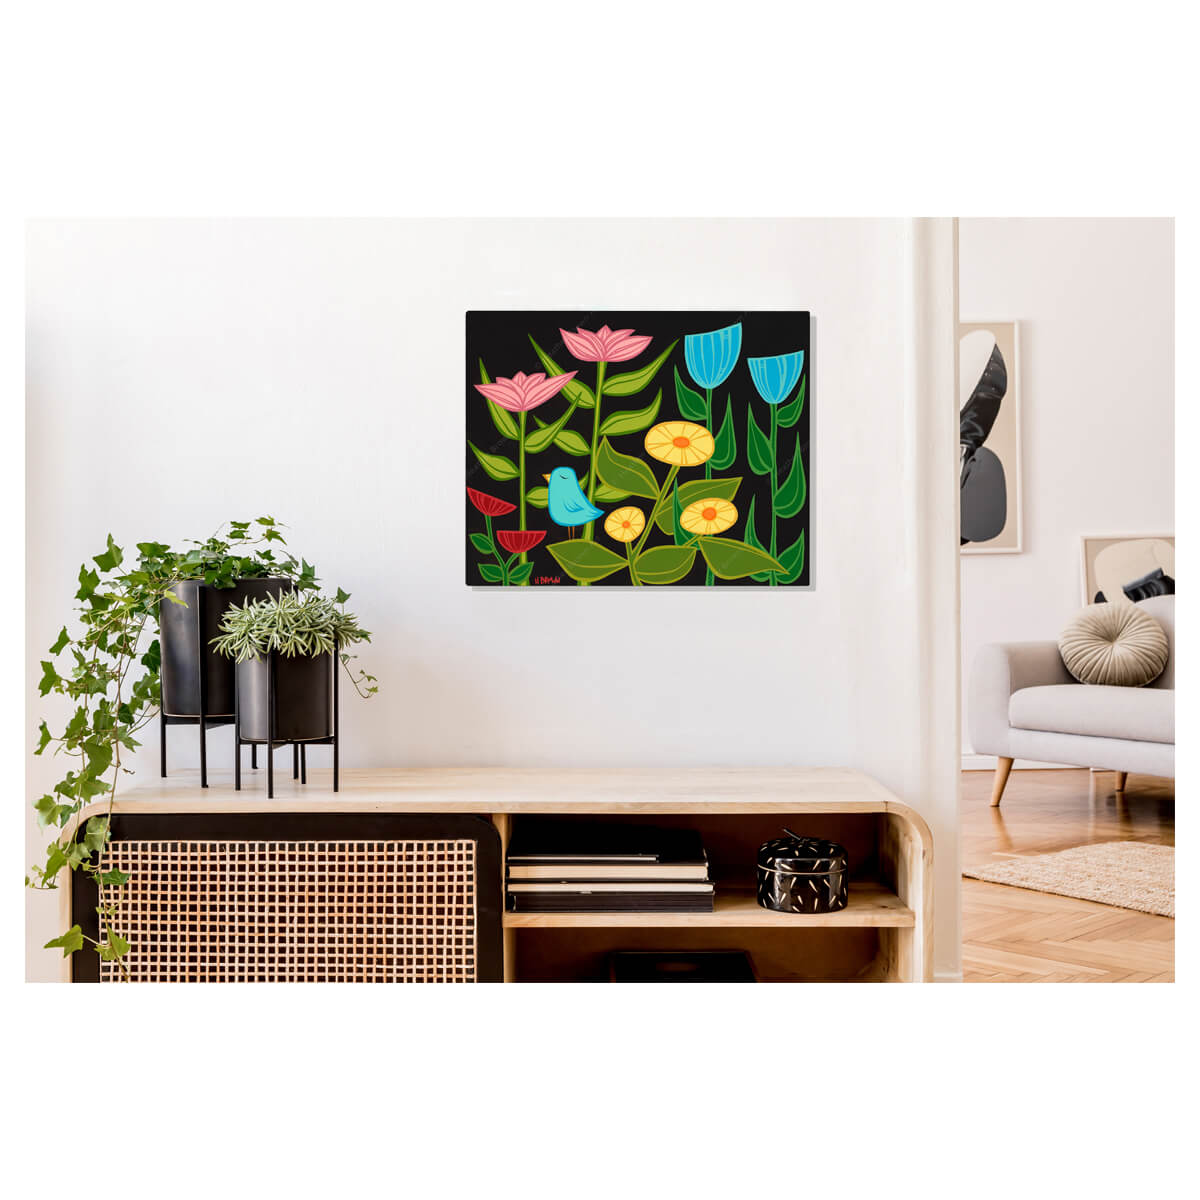 A metal art print featuring a vibrant collection of tropical flora and a single bluebird against a black night sky by Hawaii surf artist Heather Brown